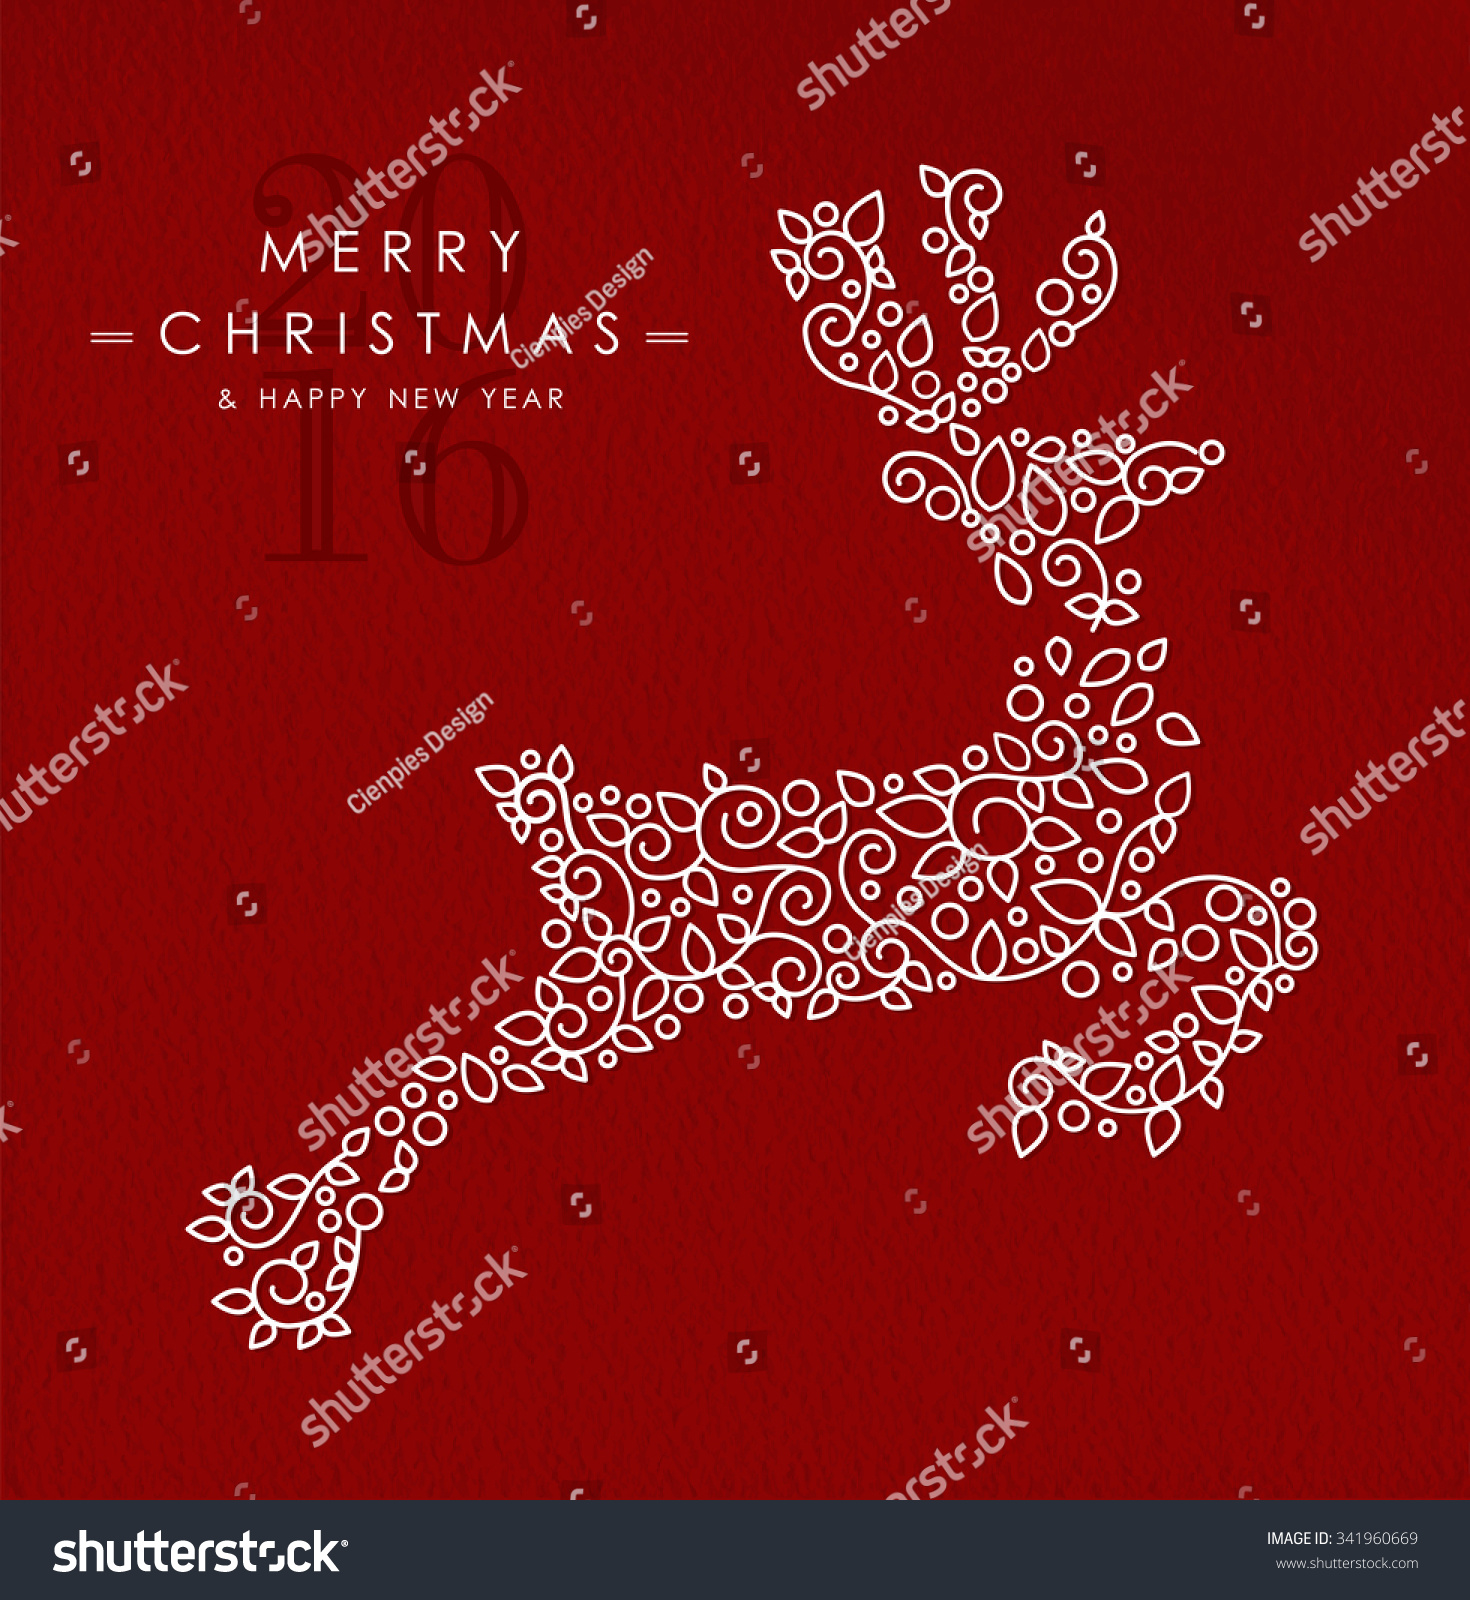 Merry Christmas Happy New Year 2016 greeting card background Linear reindeer jumping with monogram decoration